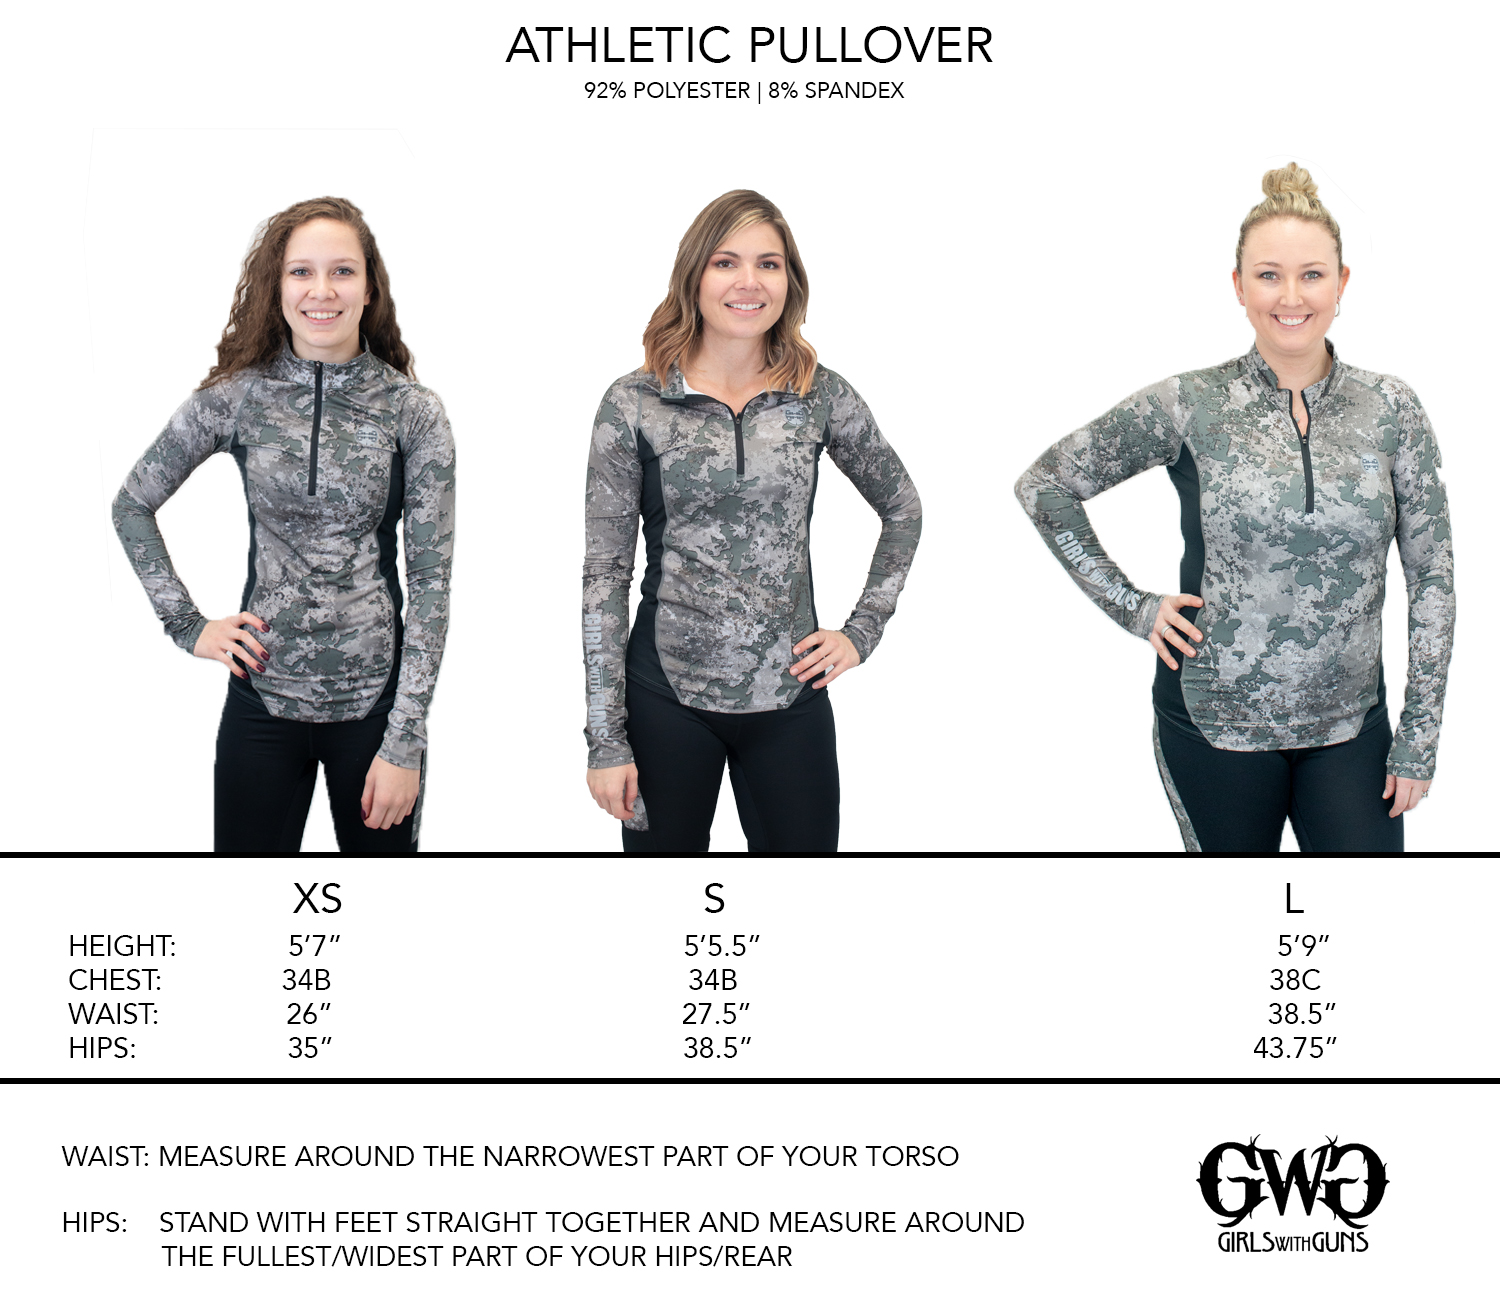 https://gwgclothing.com/wp-content/uploads/2018/08/athletic-pullover-size-chart.jpg